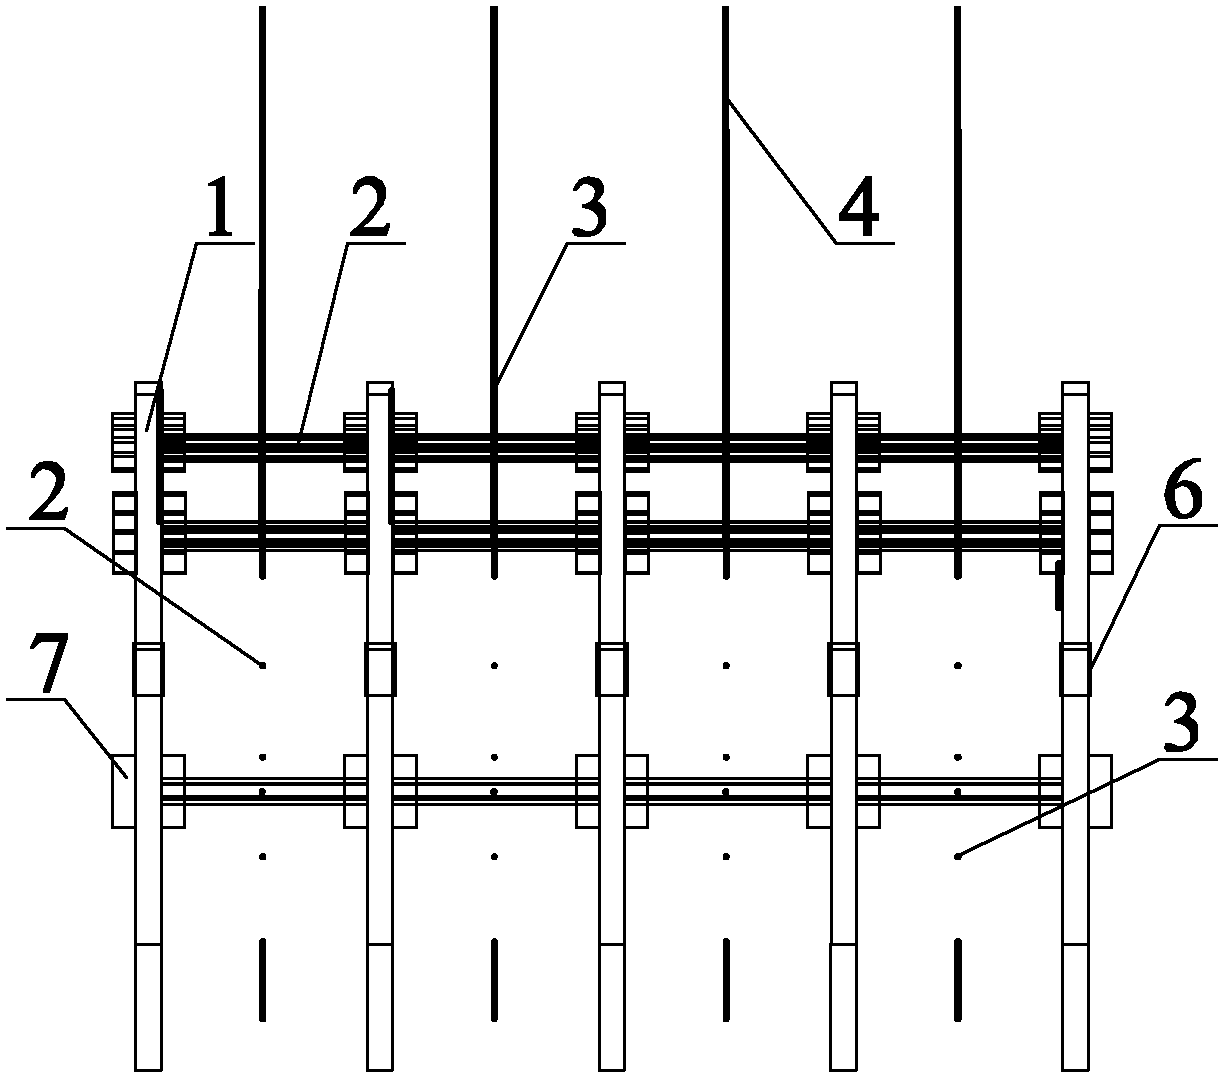 Three-dimensional asymmetrical supporting system